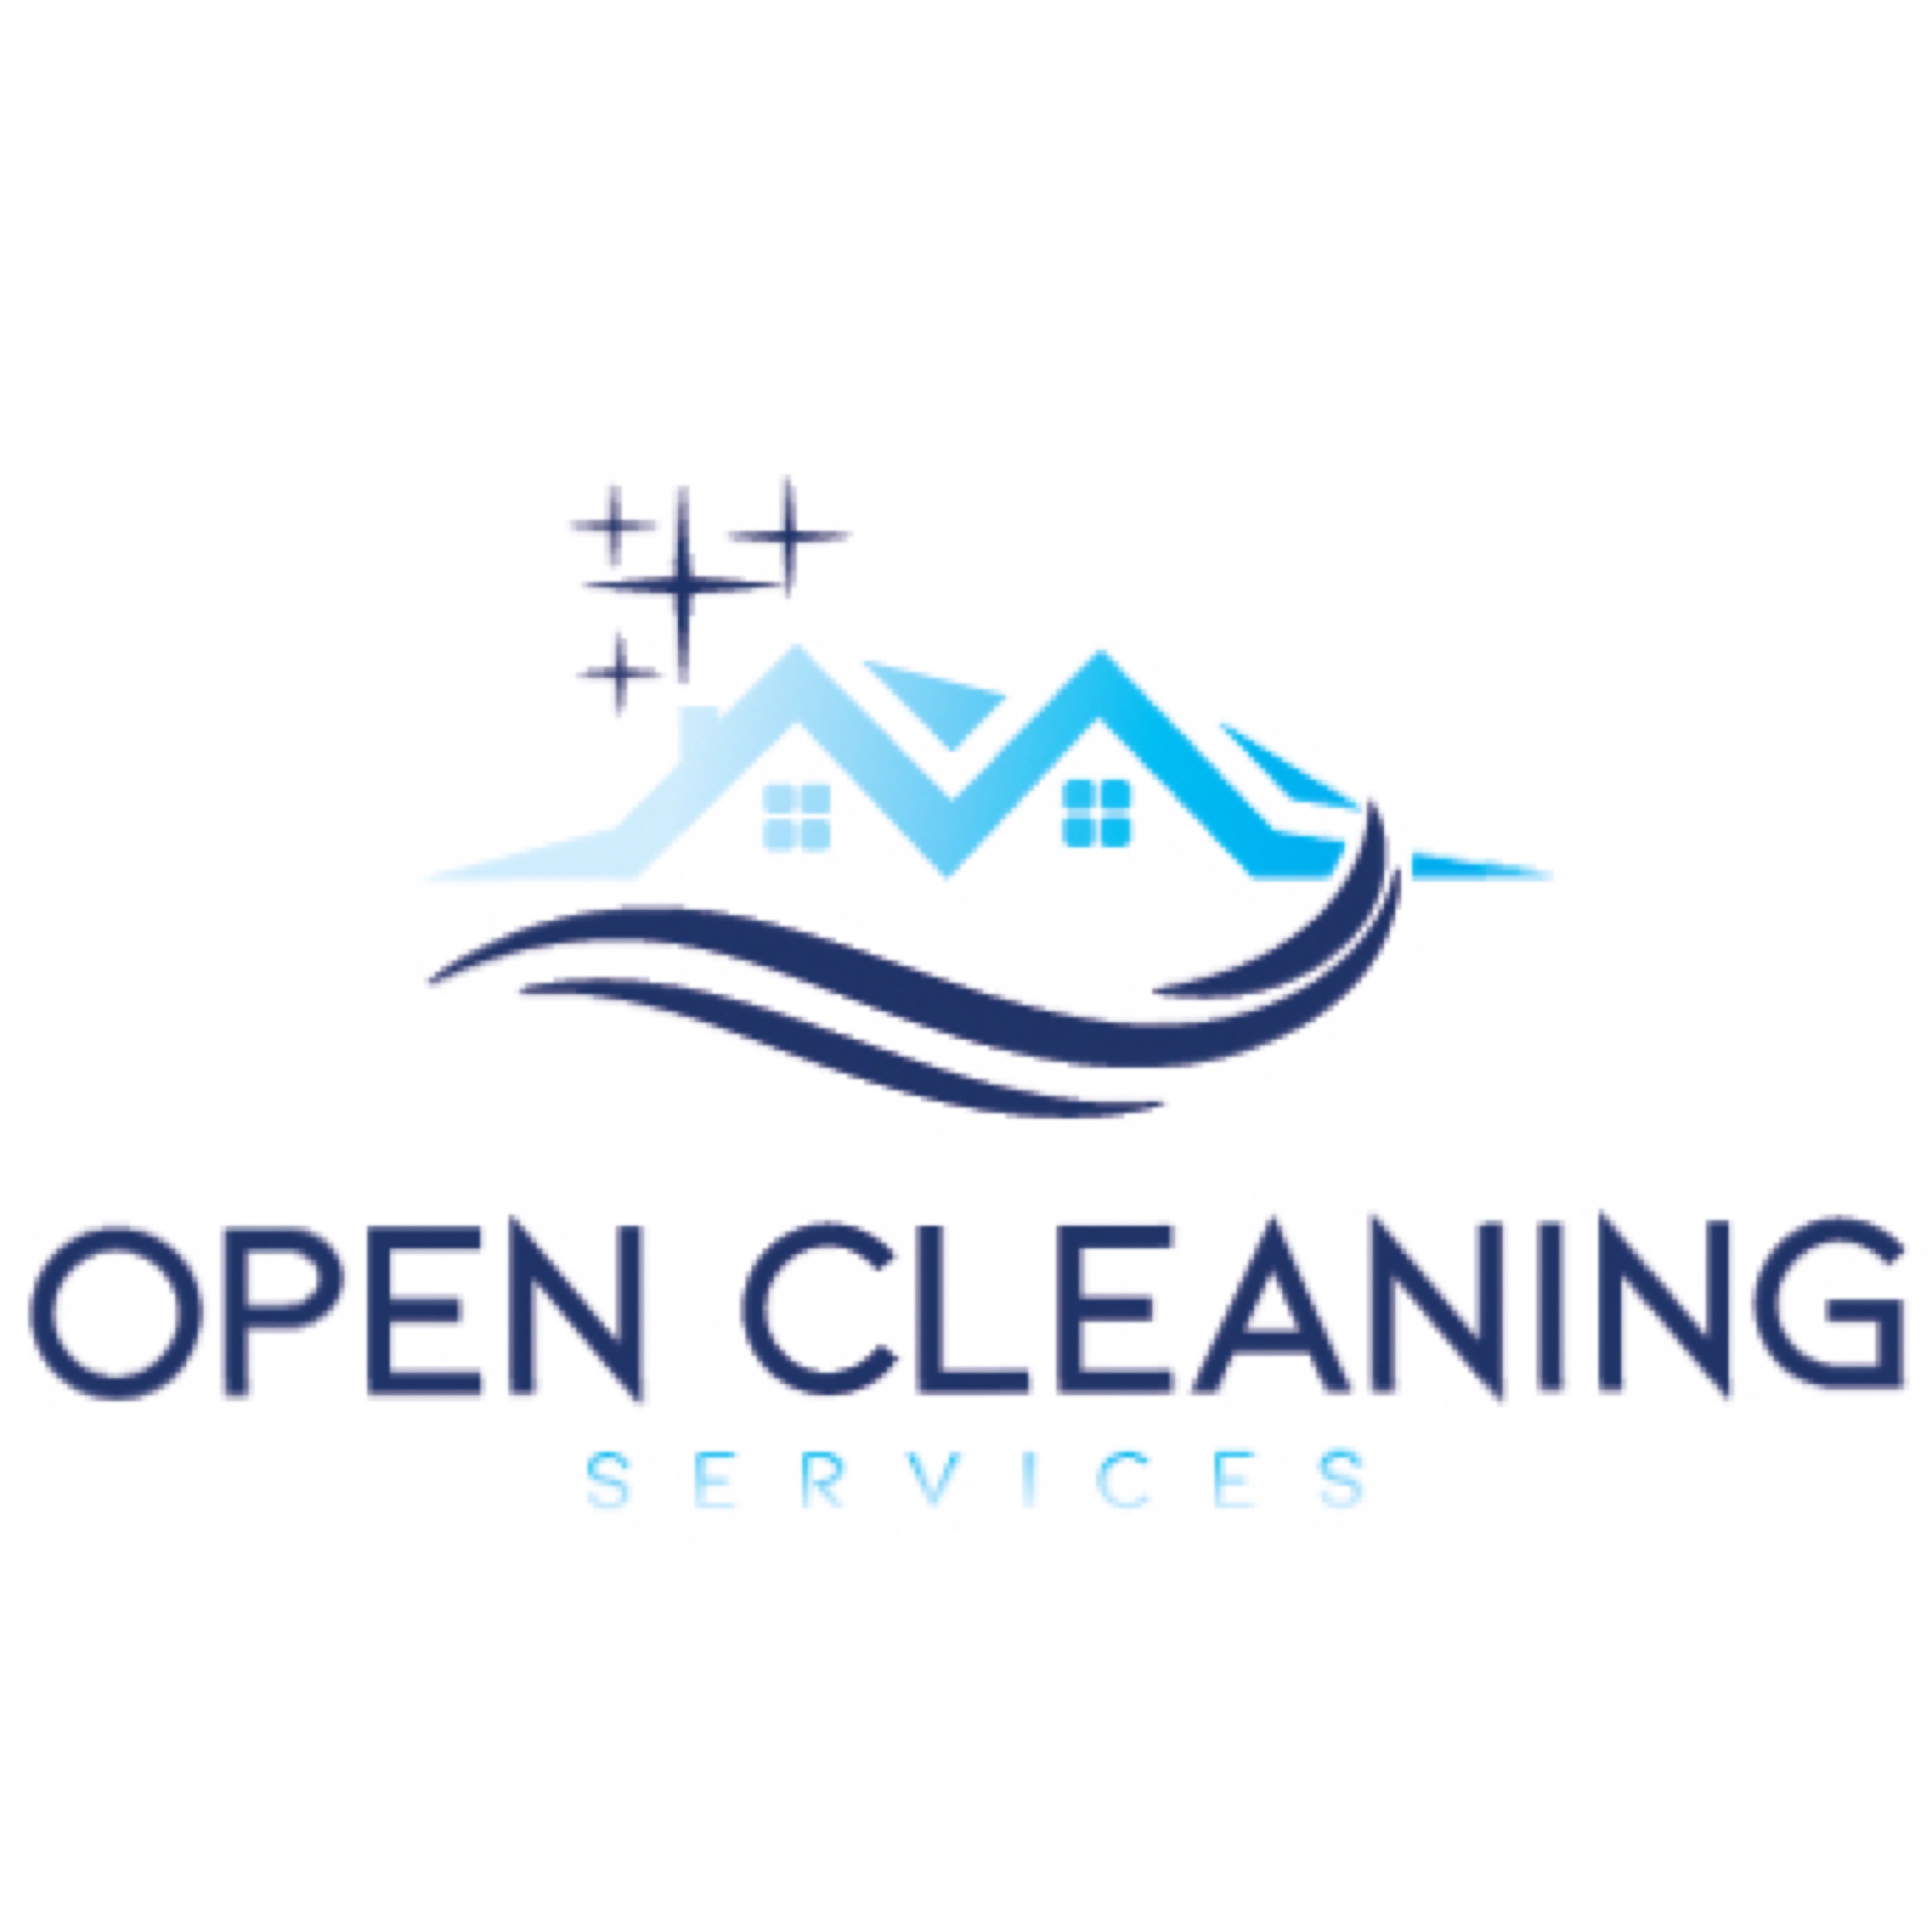 Open Cleaning Services Logo